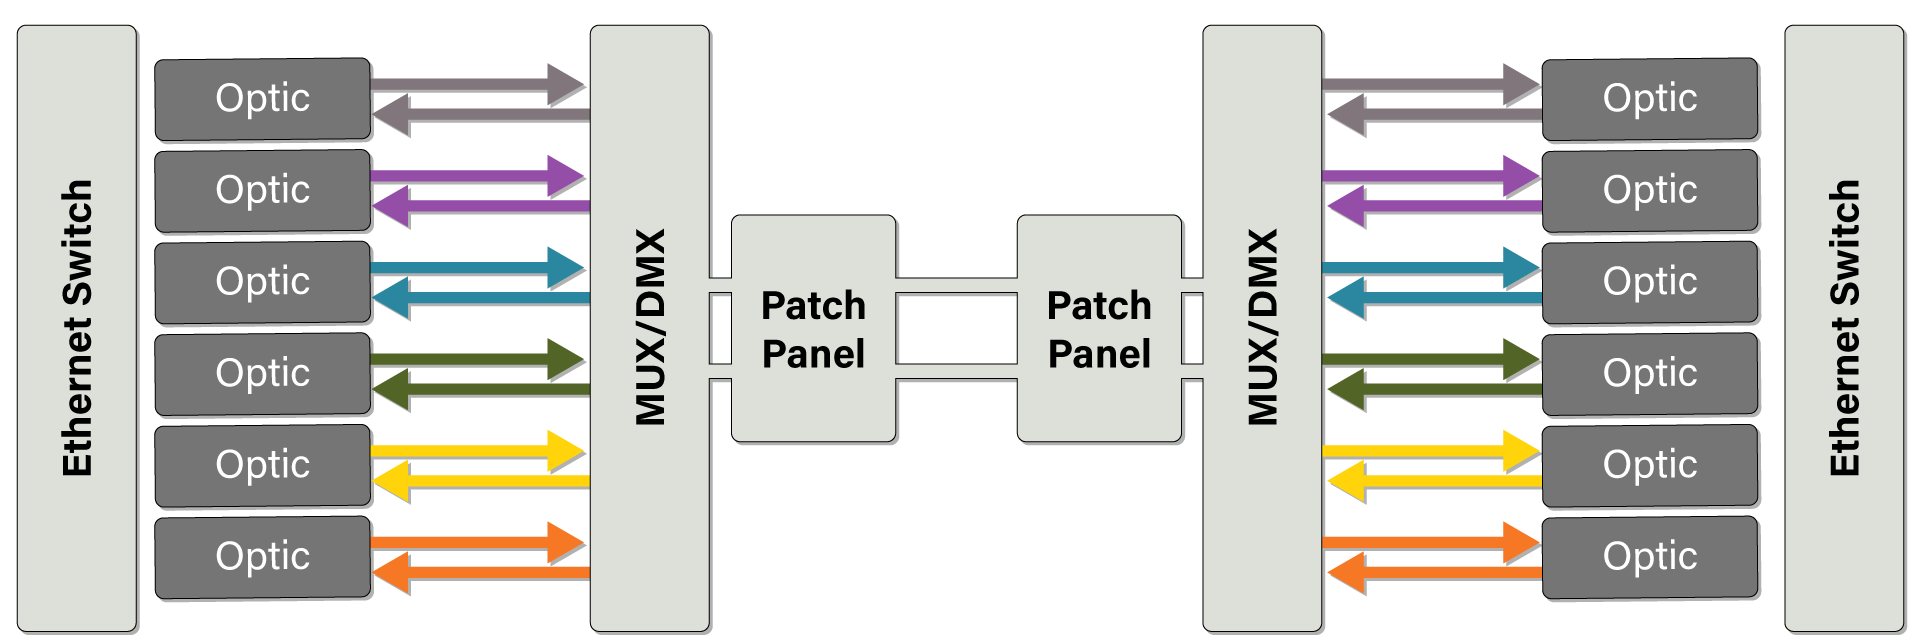 Graphic showing ethernet switch and mux/demux optic flow